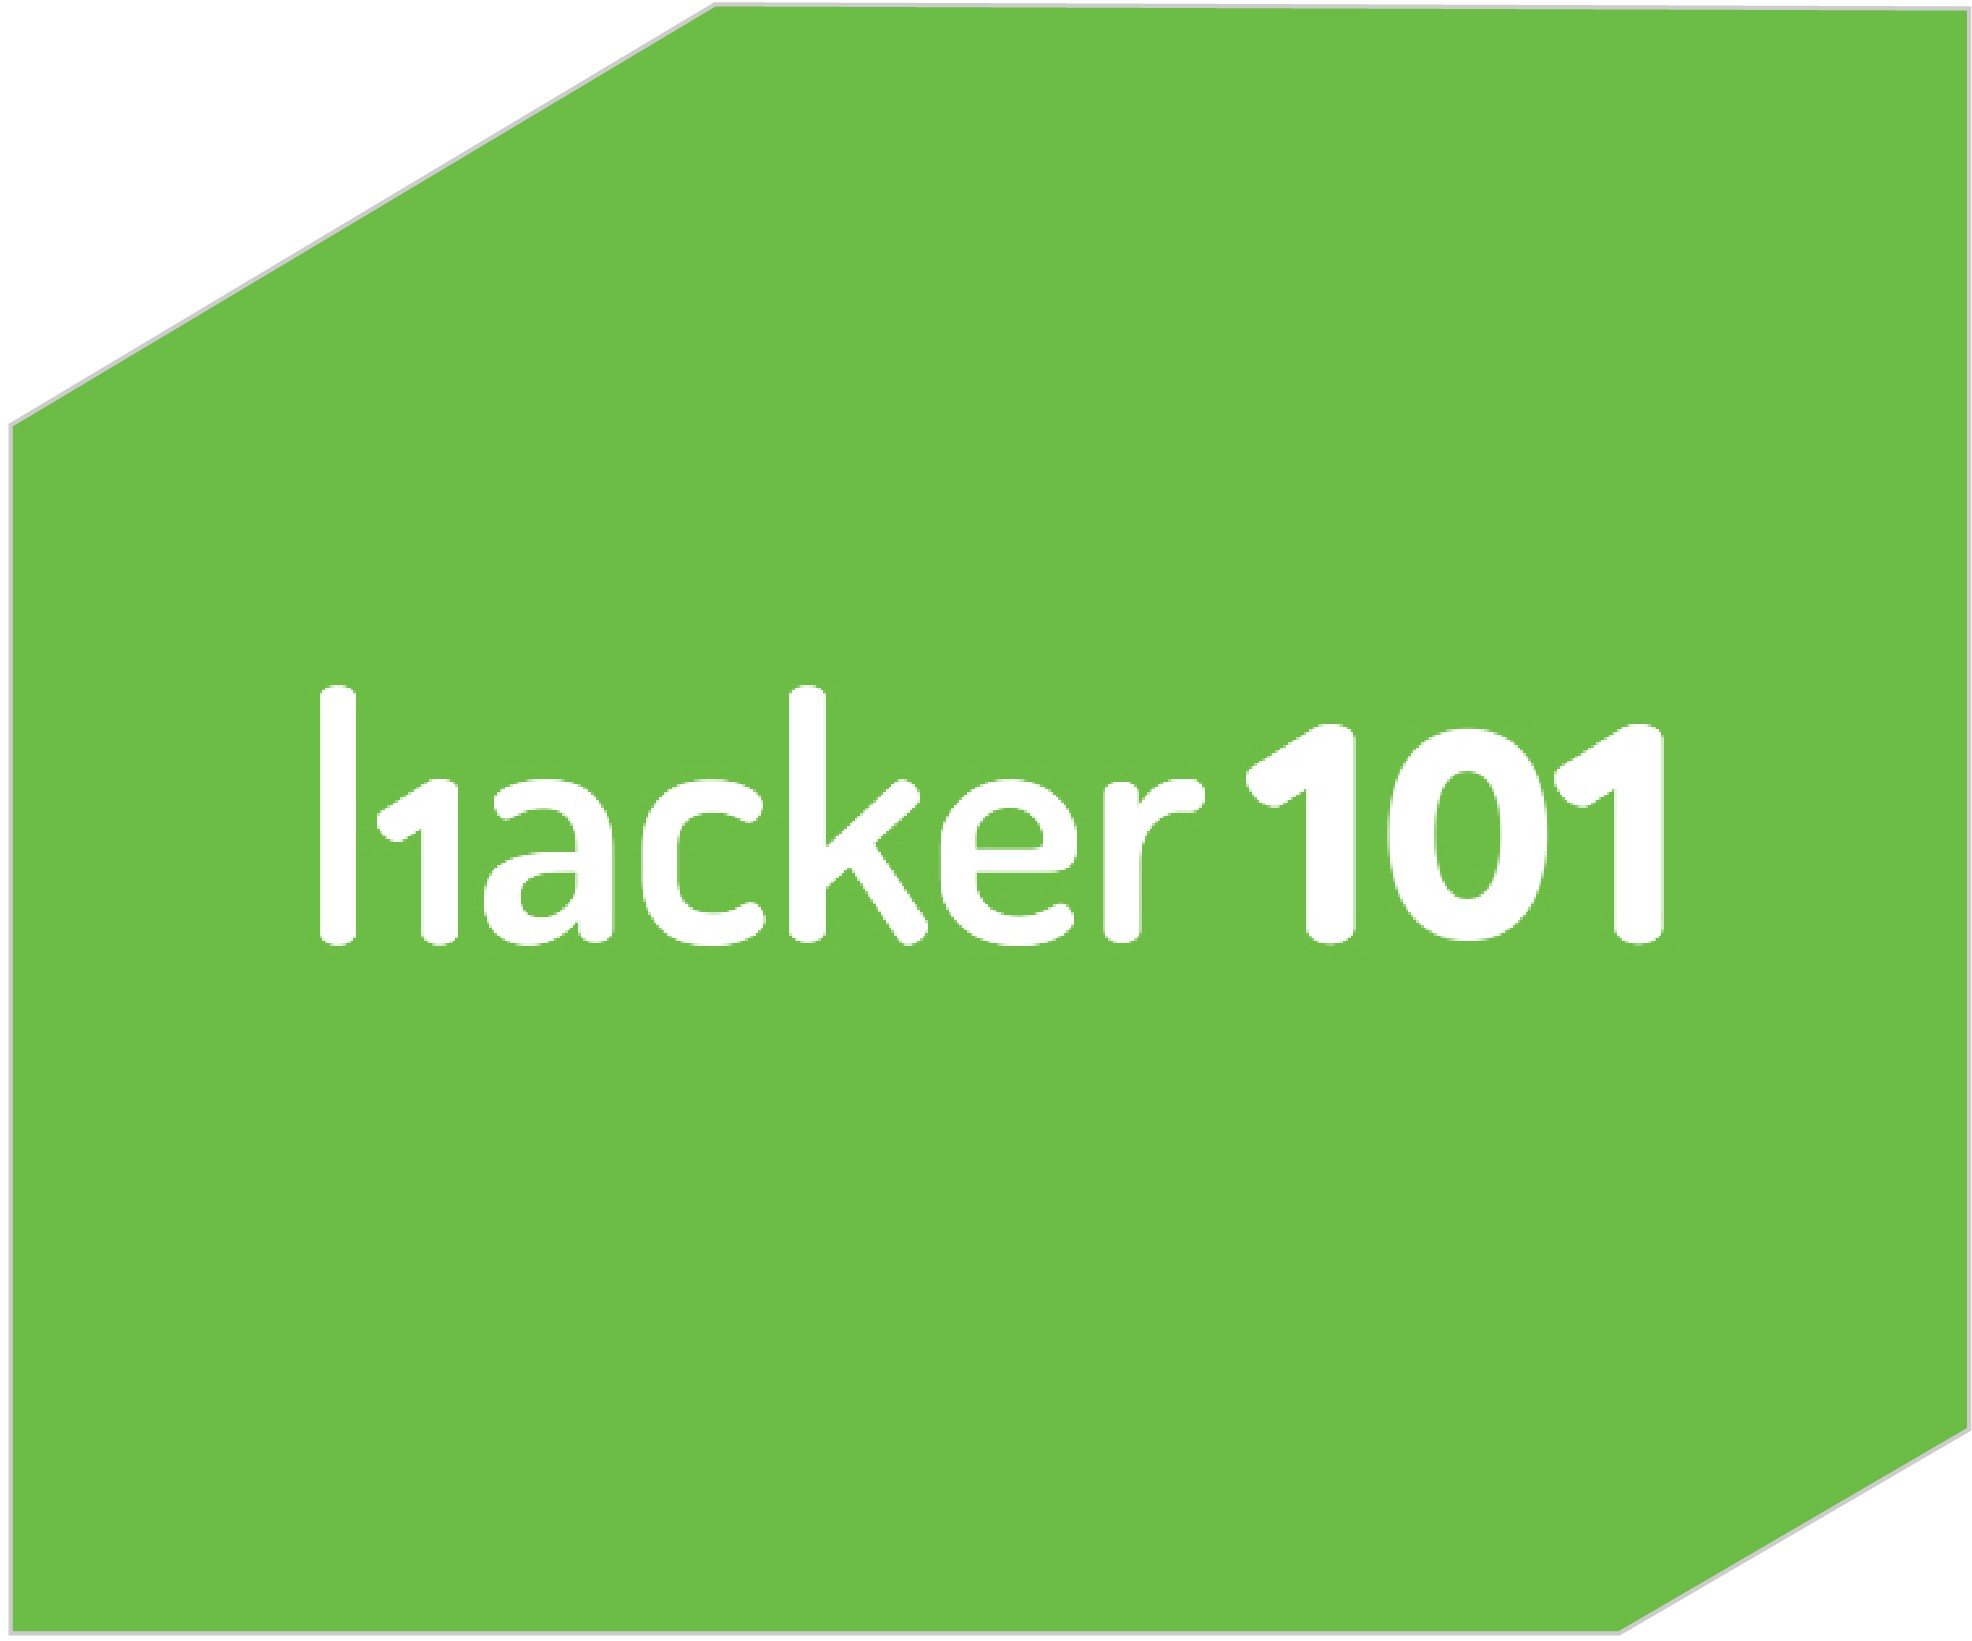 Getting Started Hacker101